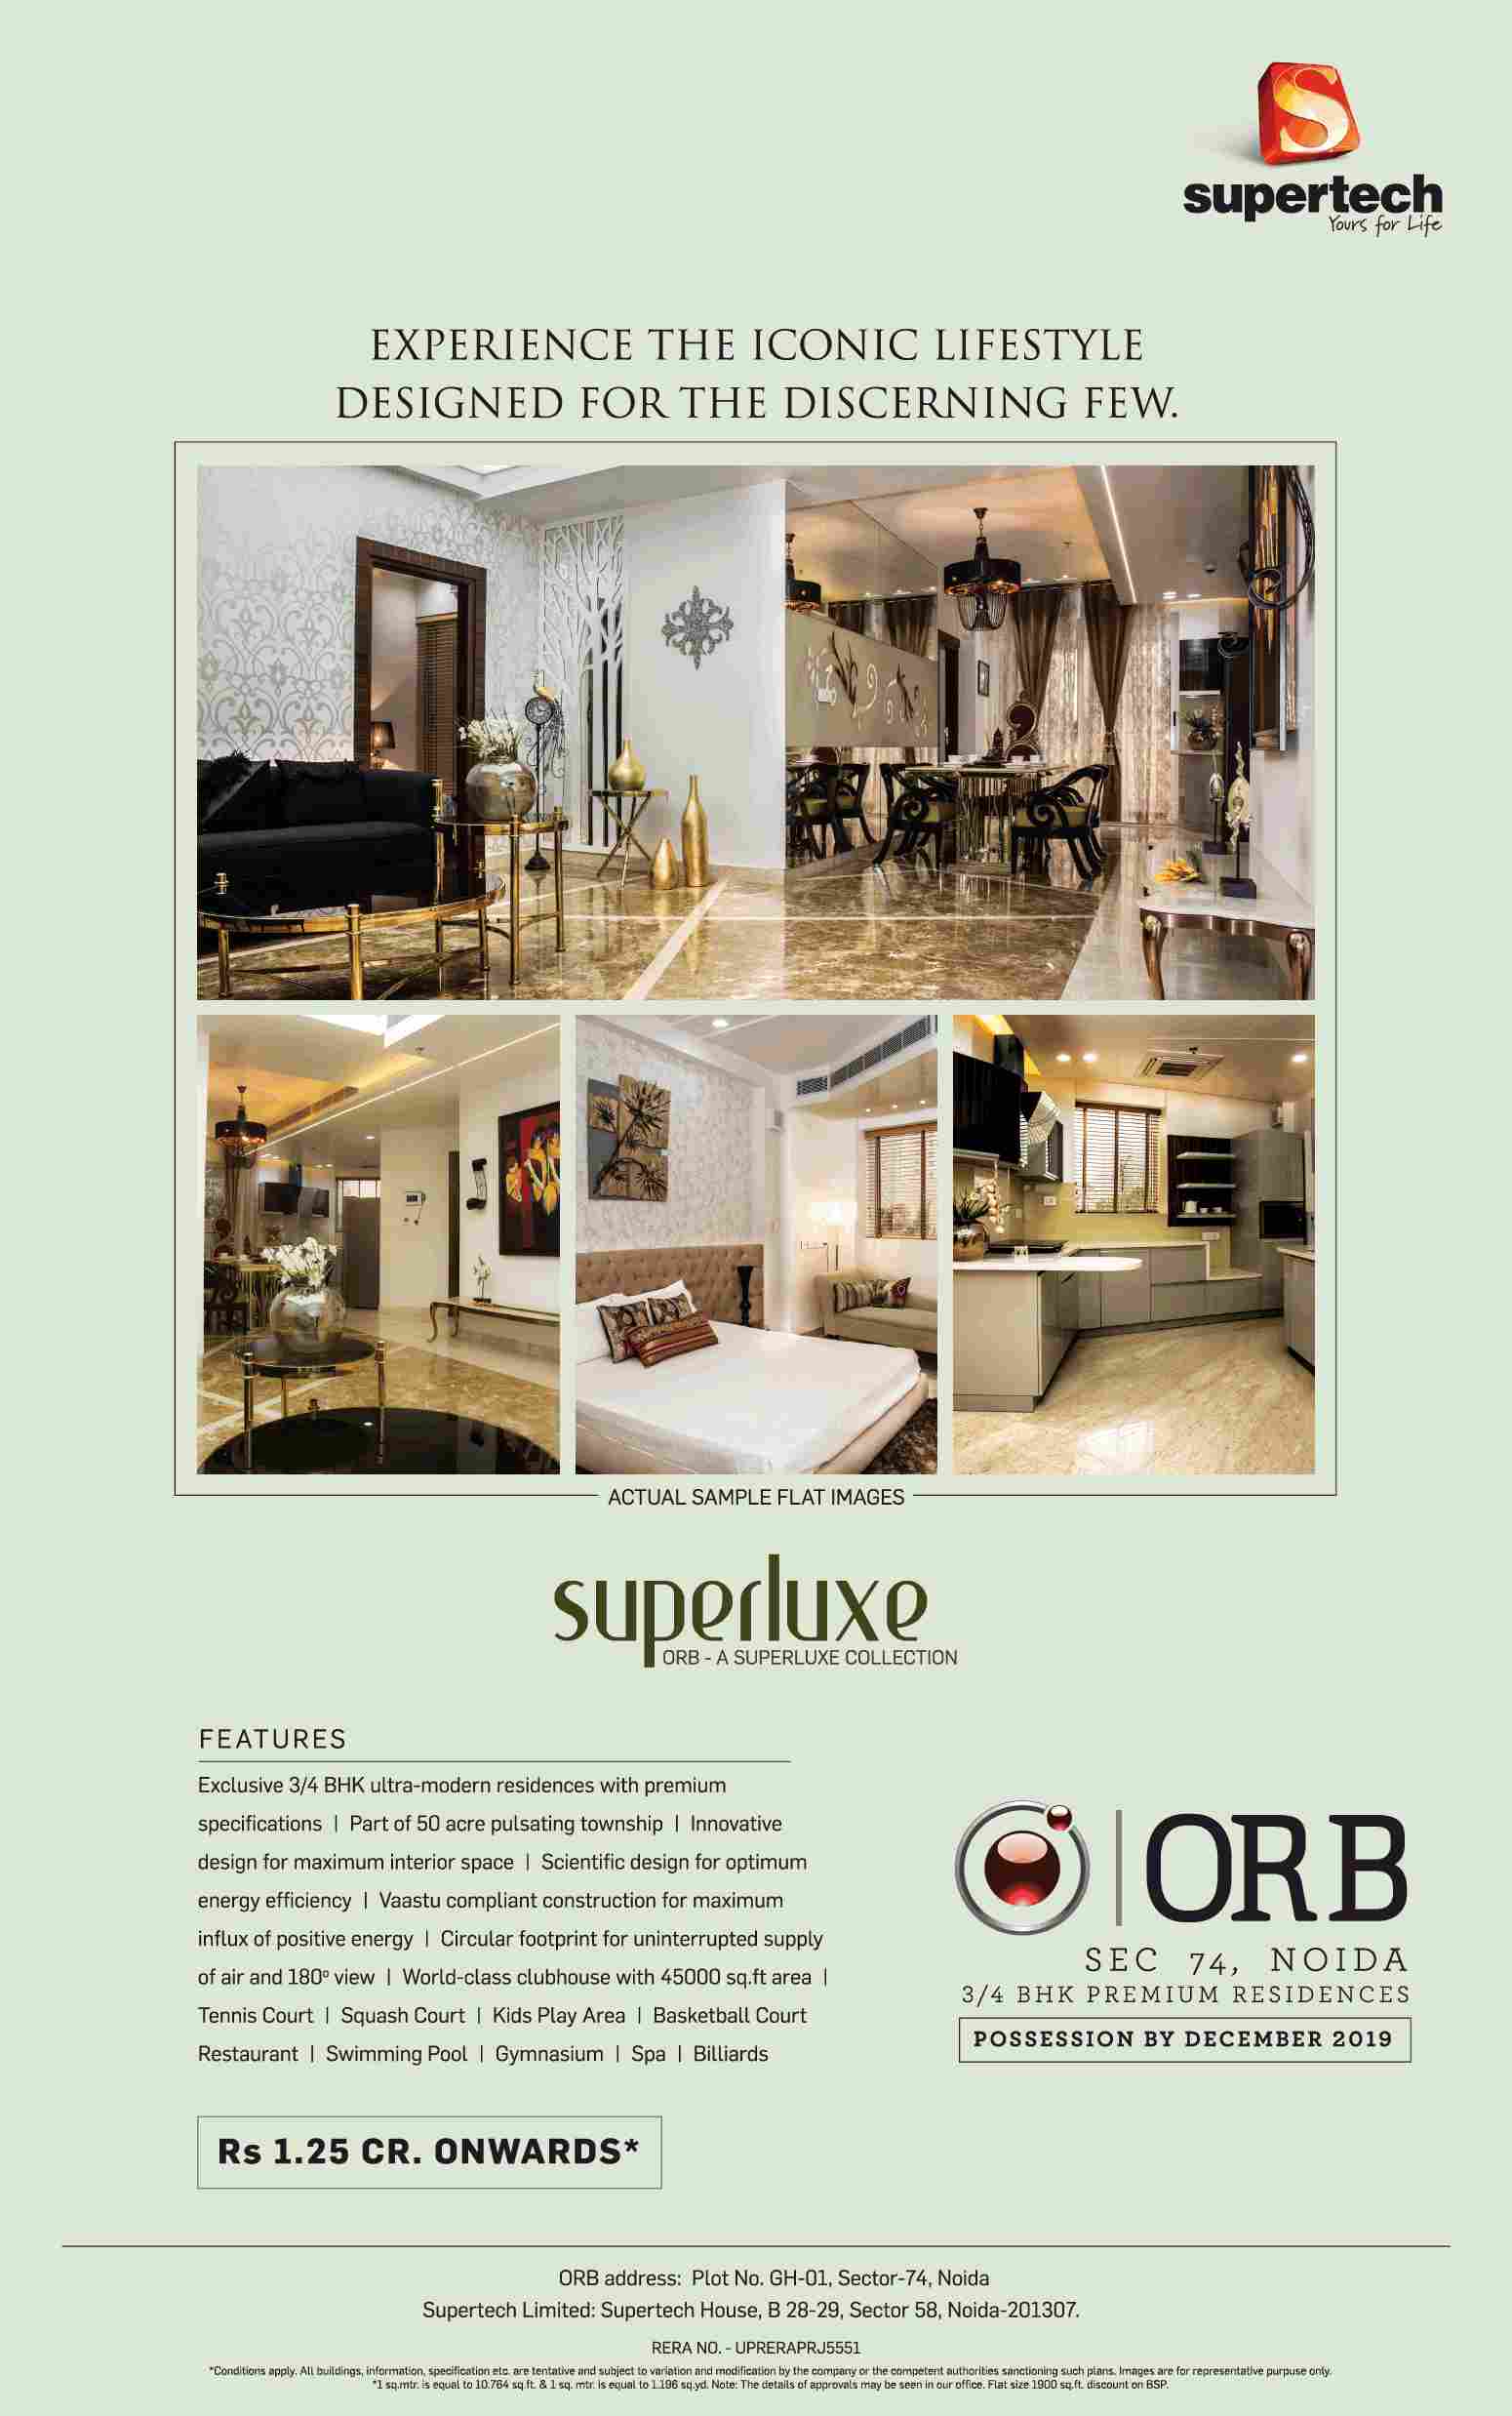 Experience the iconic lifestyle designed for the discerning few at Supertech ORB in Noida